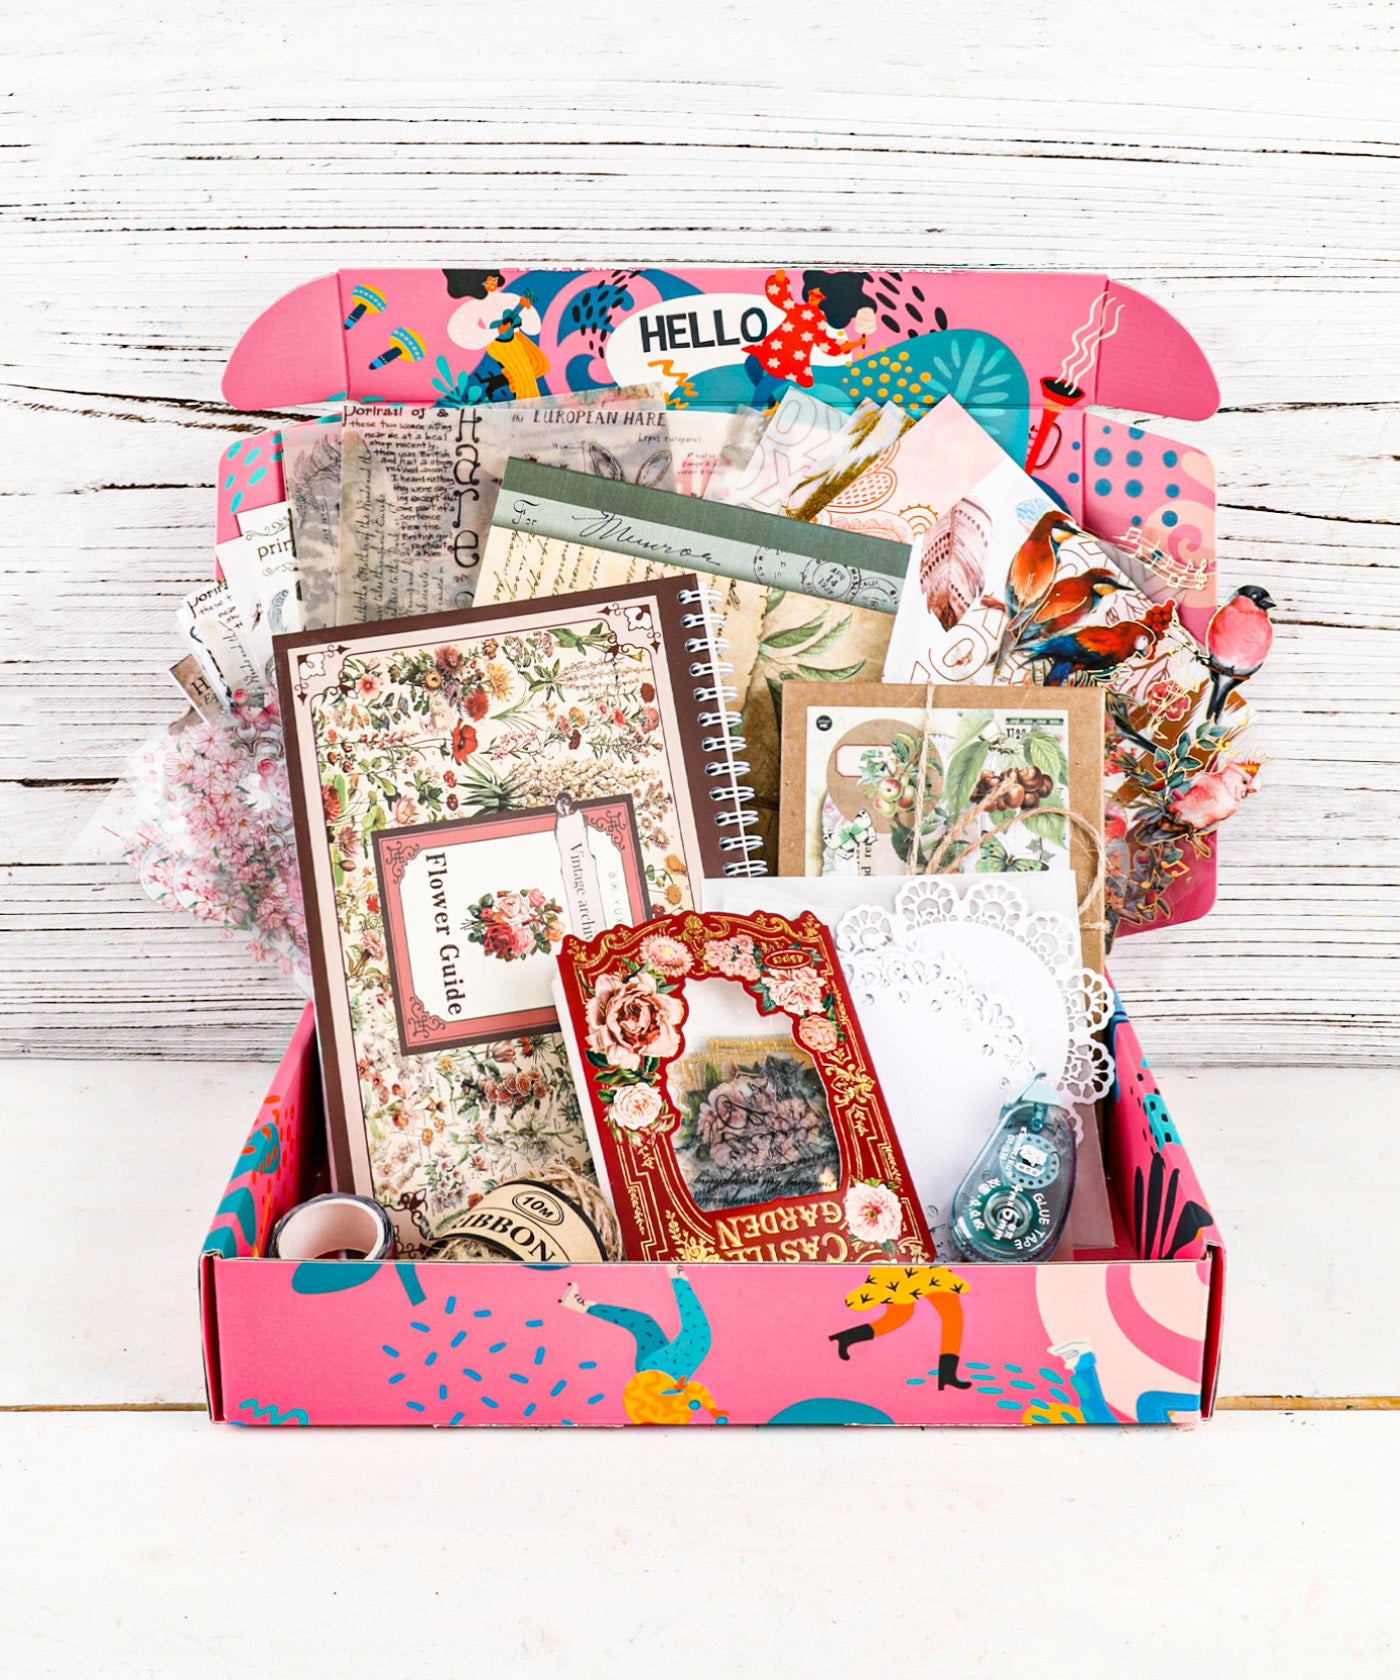 Grabie Complete Scrapbooking Kit with Full-Size Stickers and Paper, Washi Tape, Scissors, Jute String, and Storage Pouch, Ideal for Albums, Card